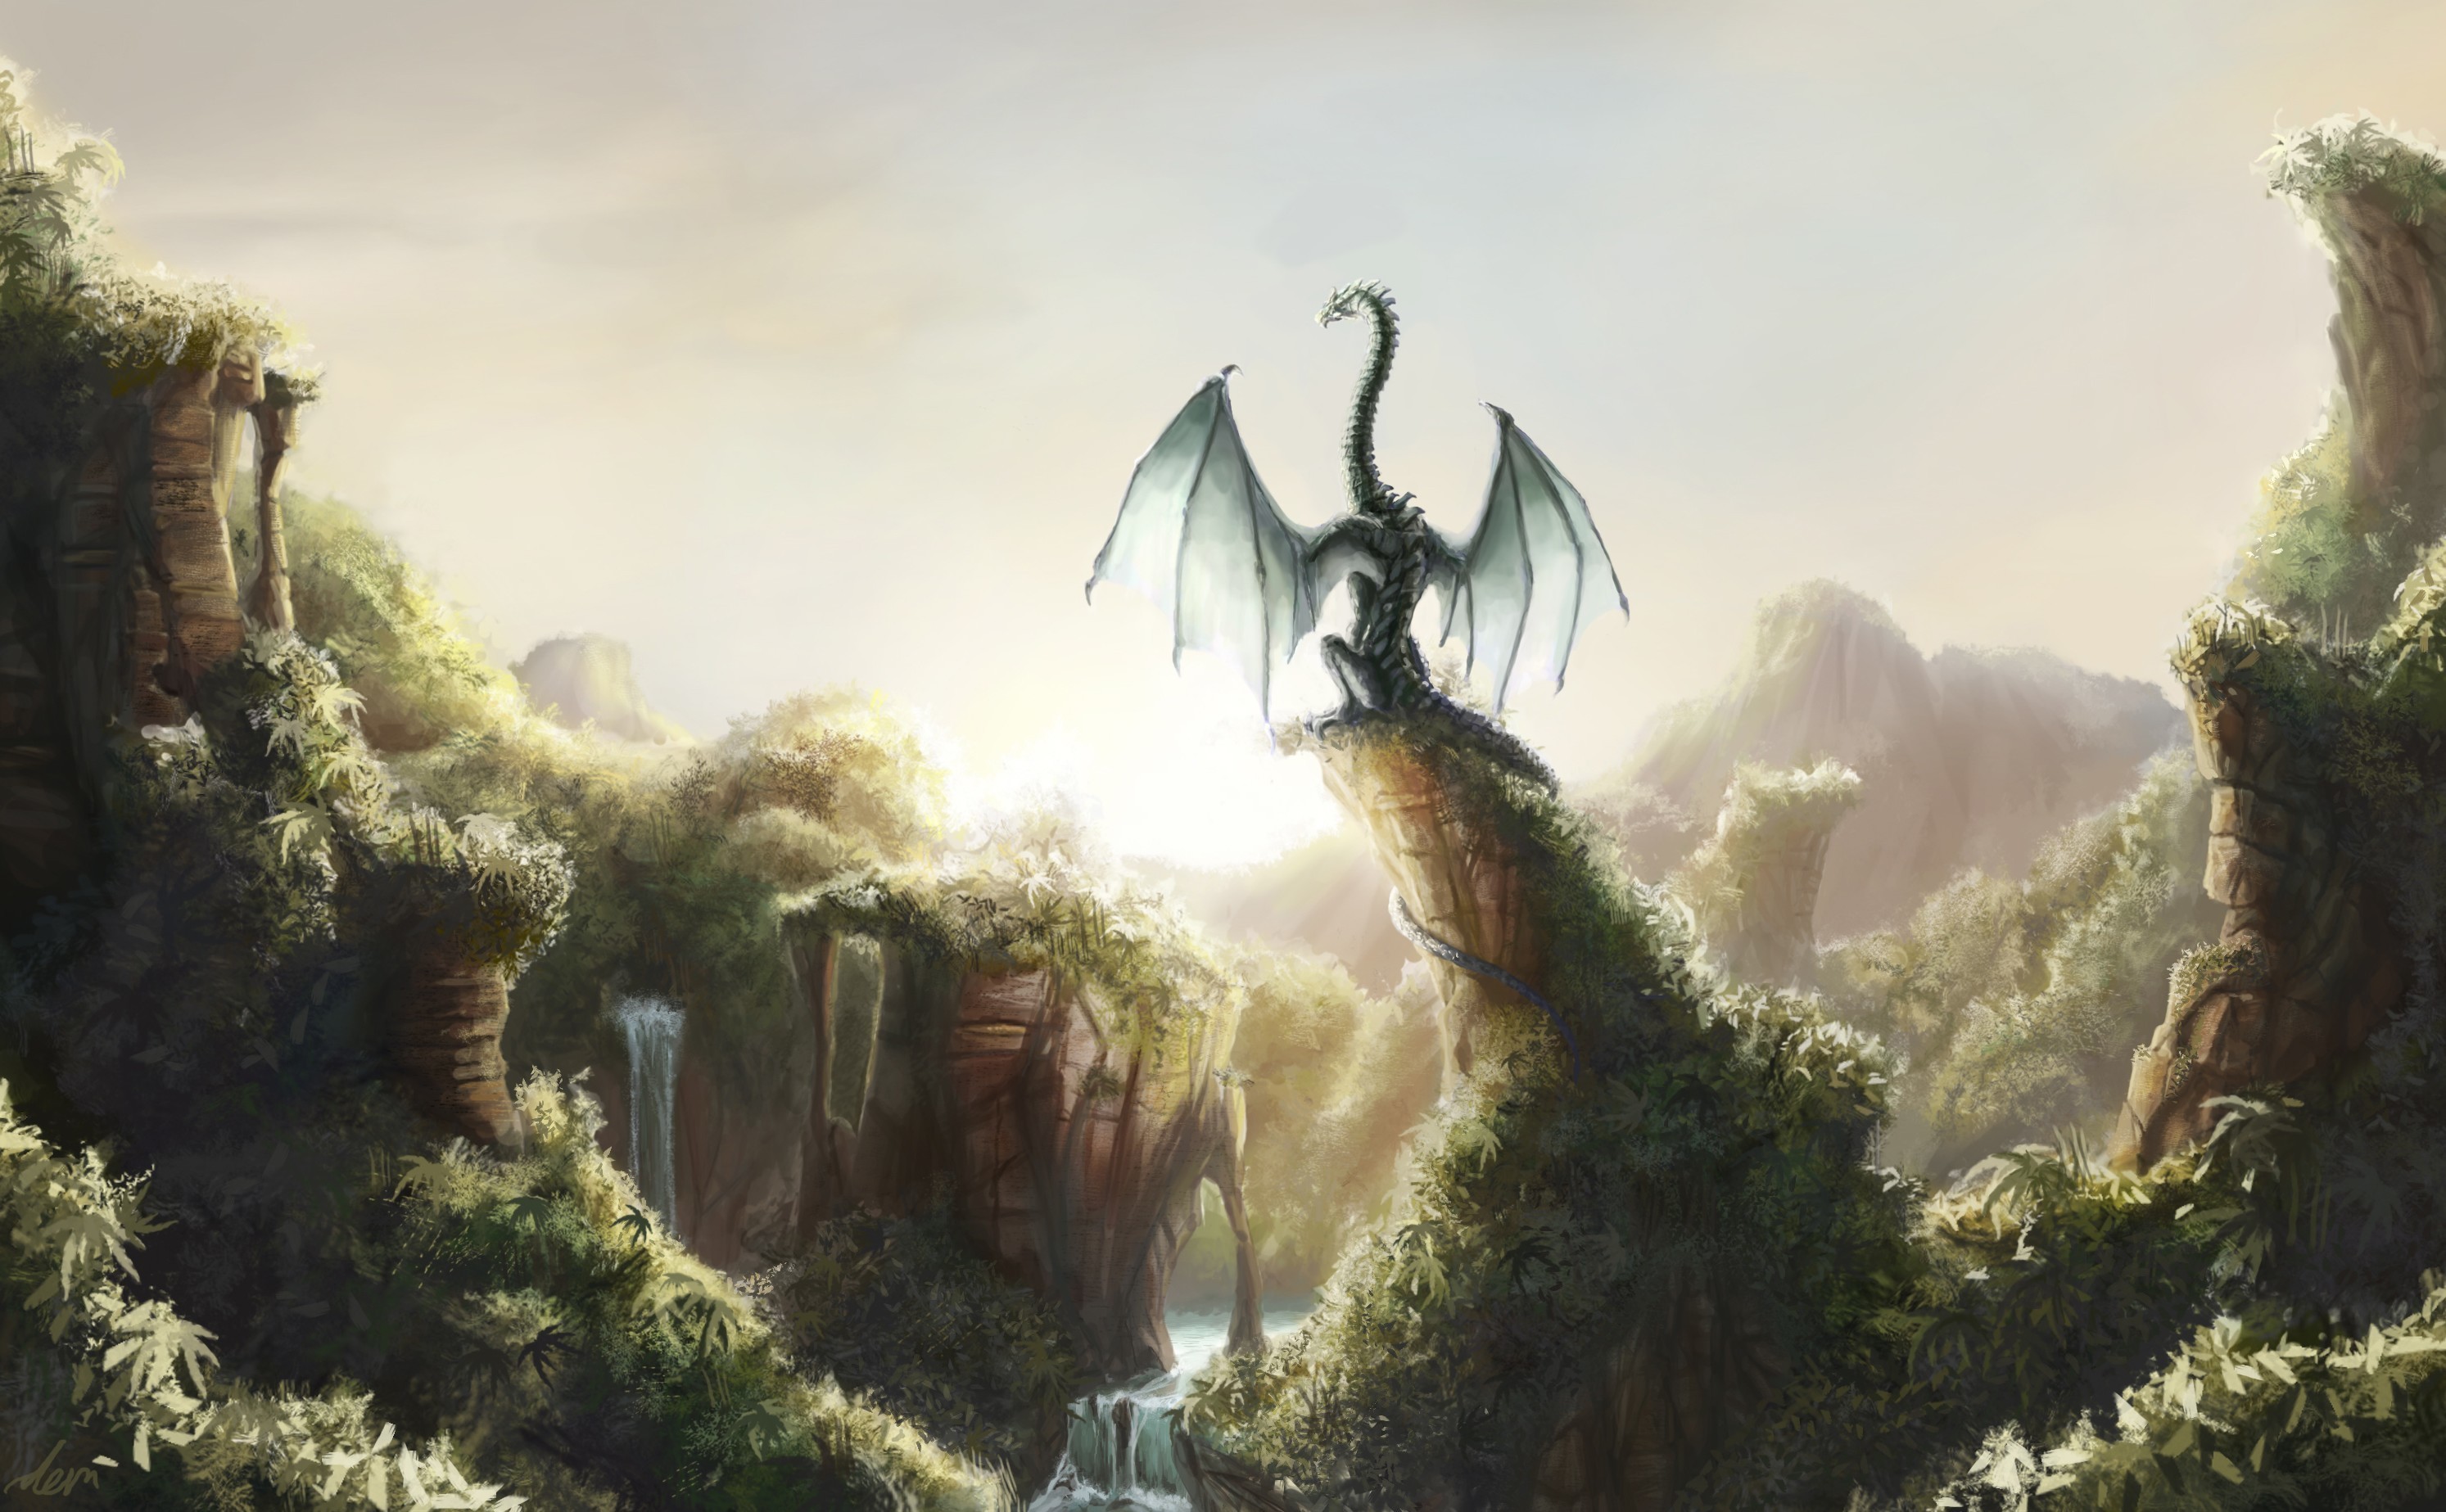 Waterfall, Forest, Best Humor Images, Dragon, Amazing - Fantasy World With Dragons - HD Wallpaper 